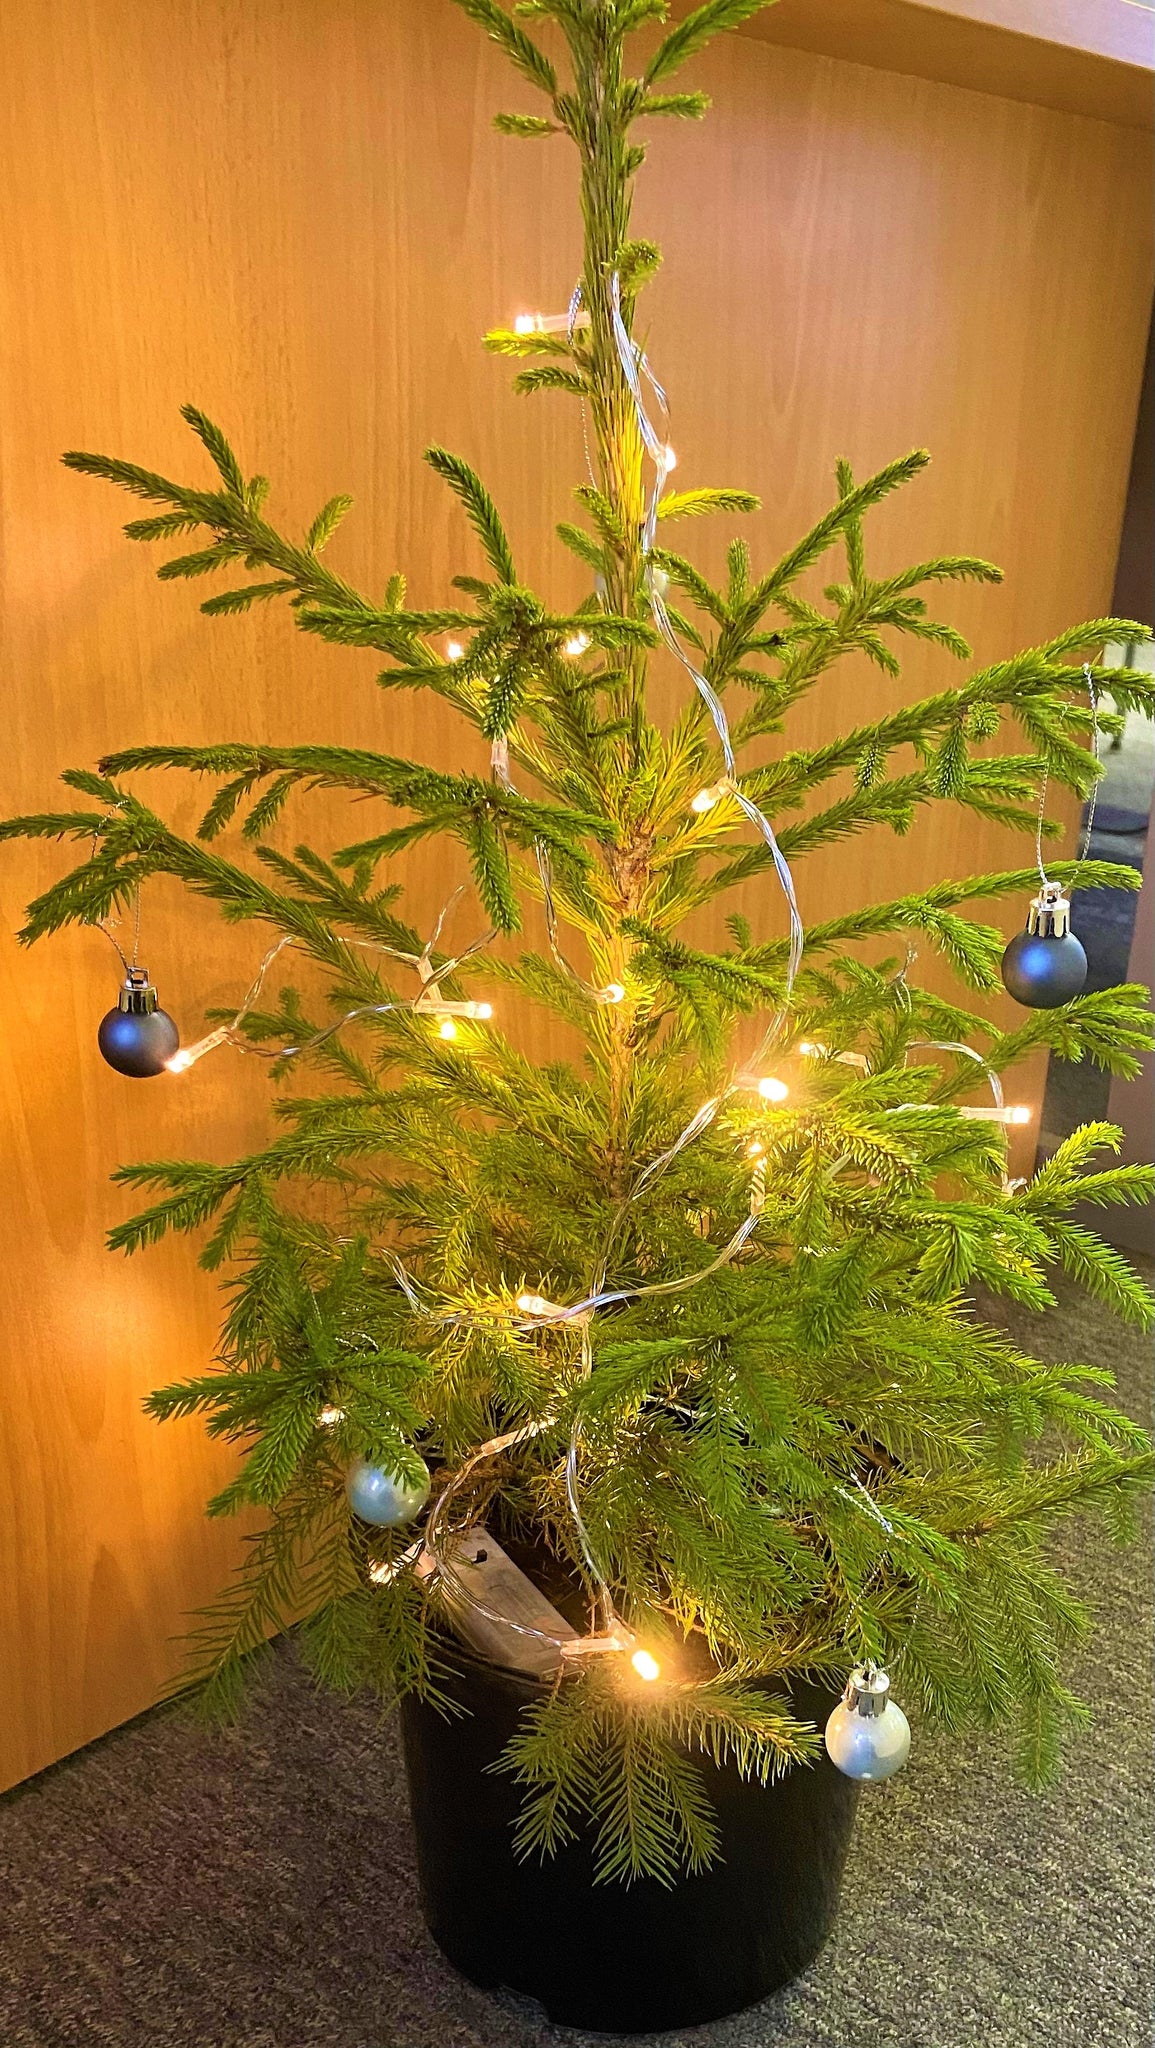 Potted Christmas Trees